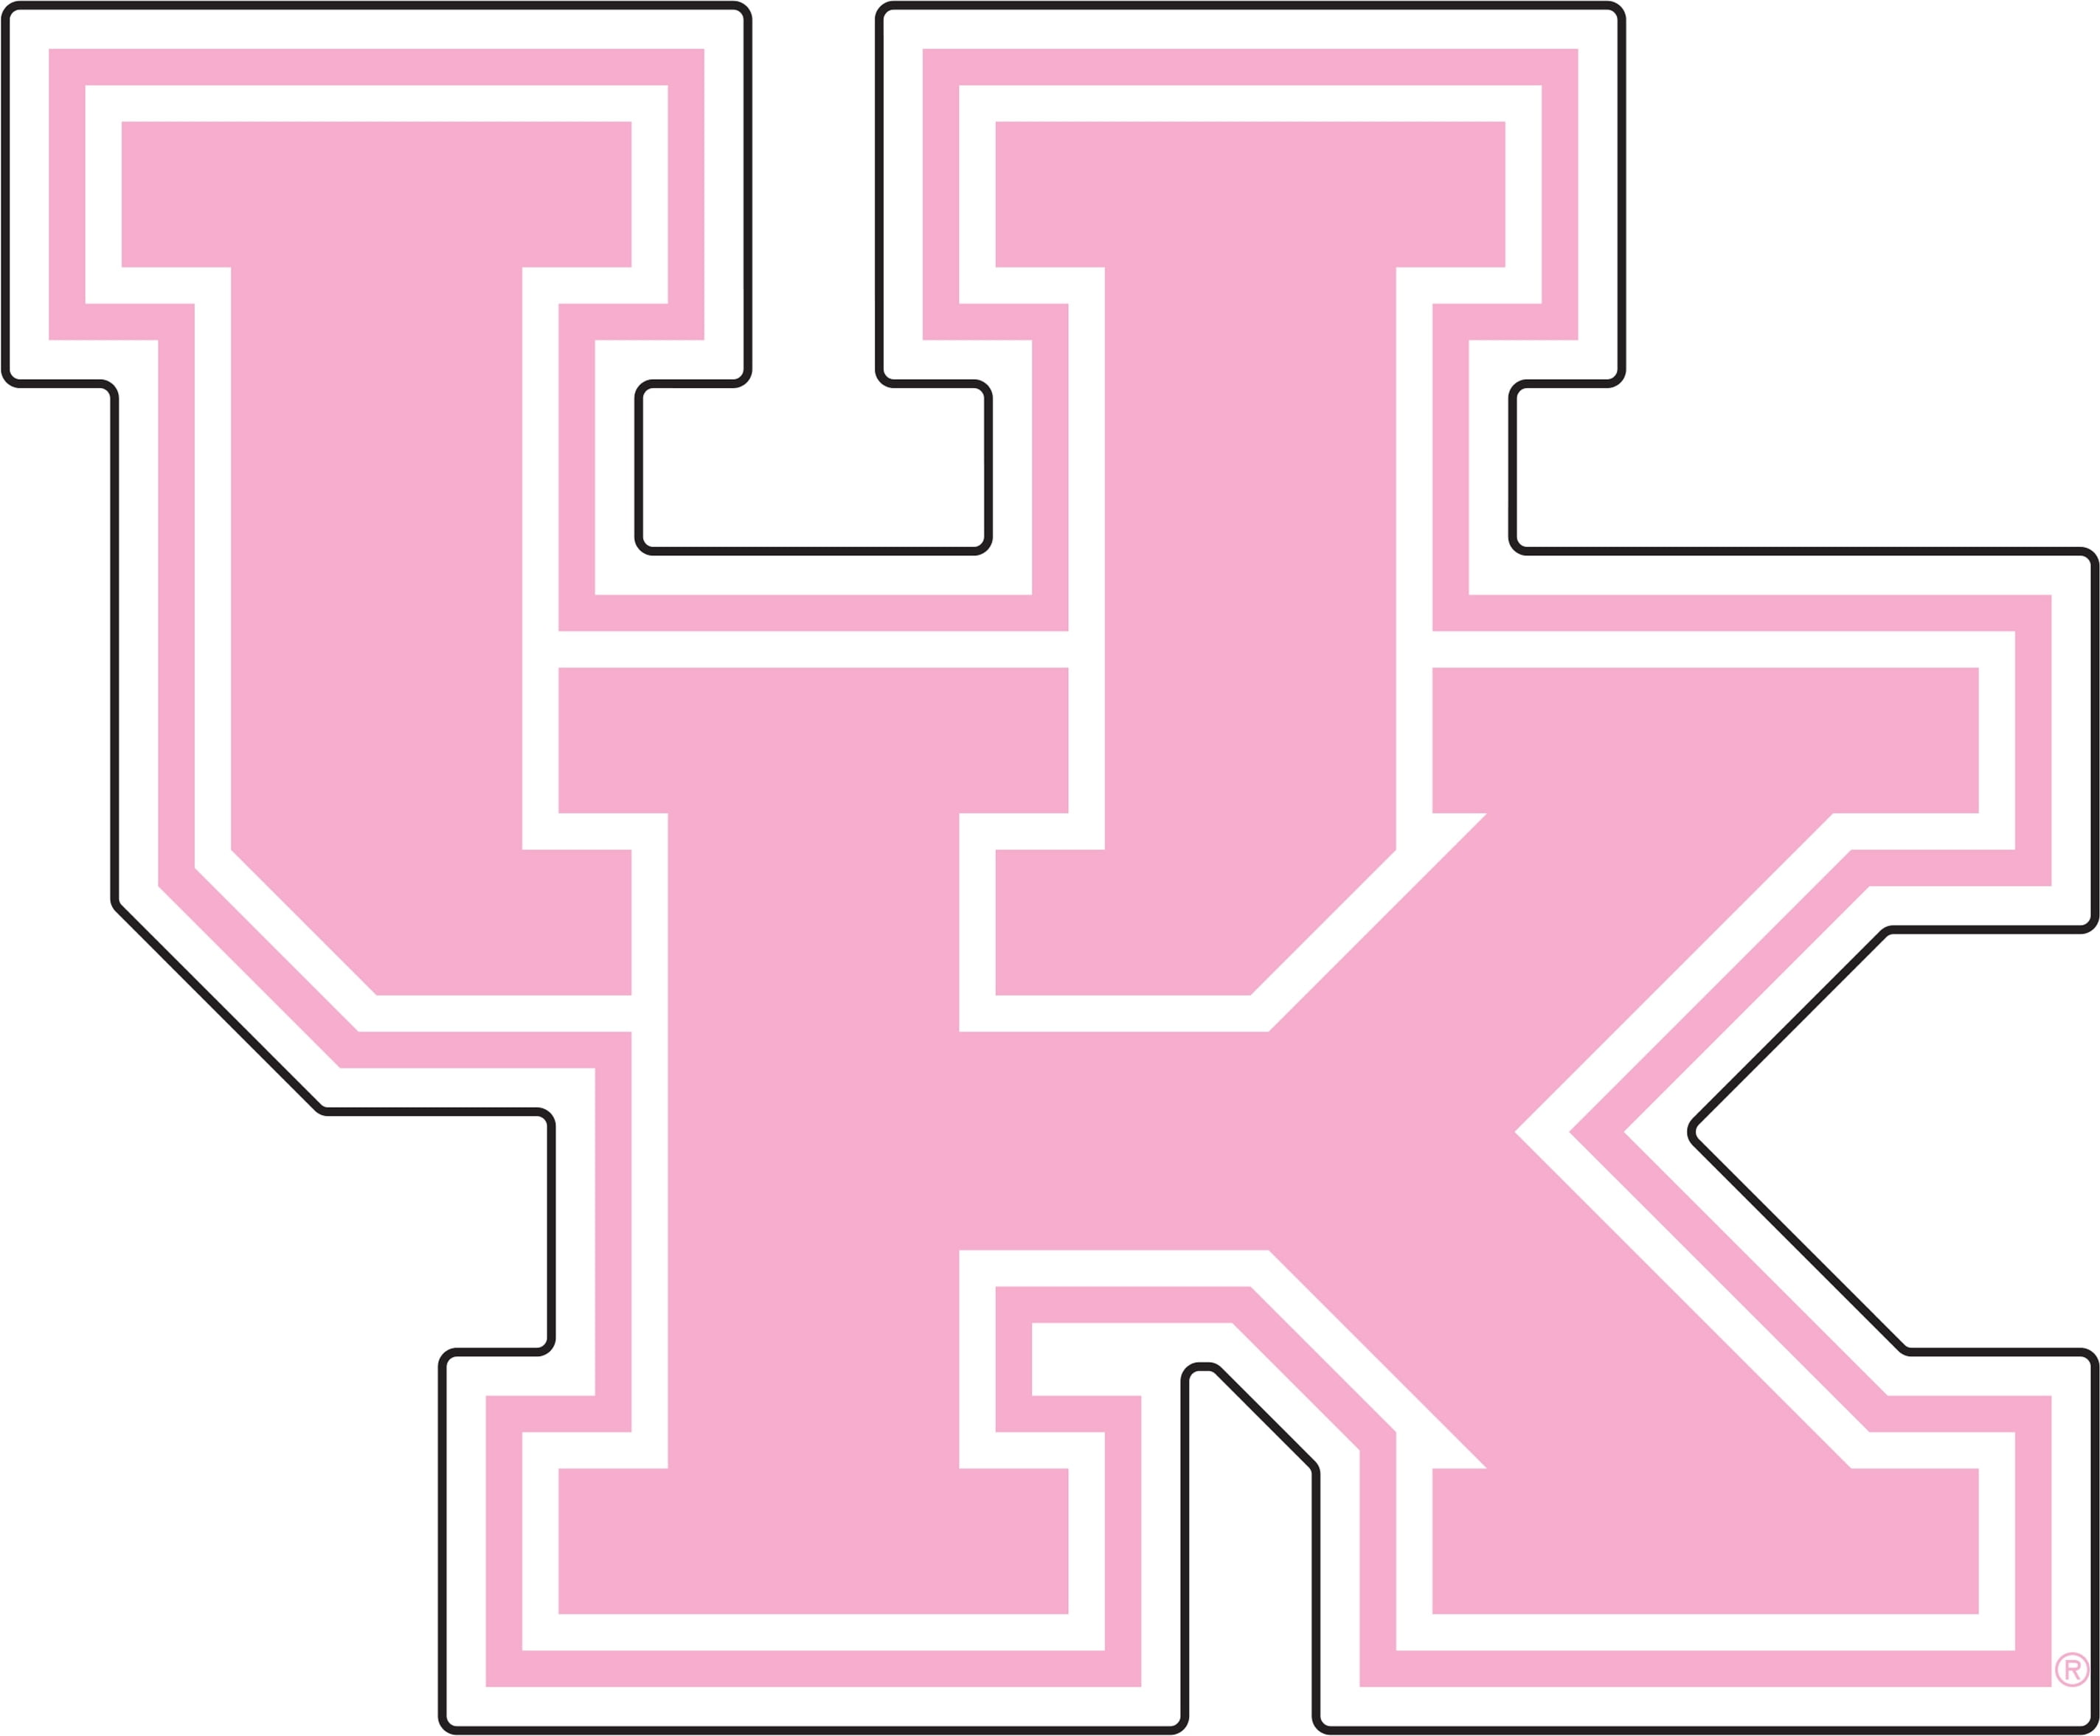 REFLECTIVE Kentucky Wildcats fire helmet decal sticker up to 12 inches 